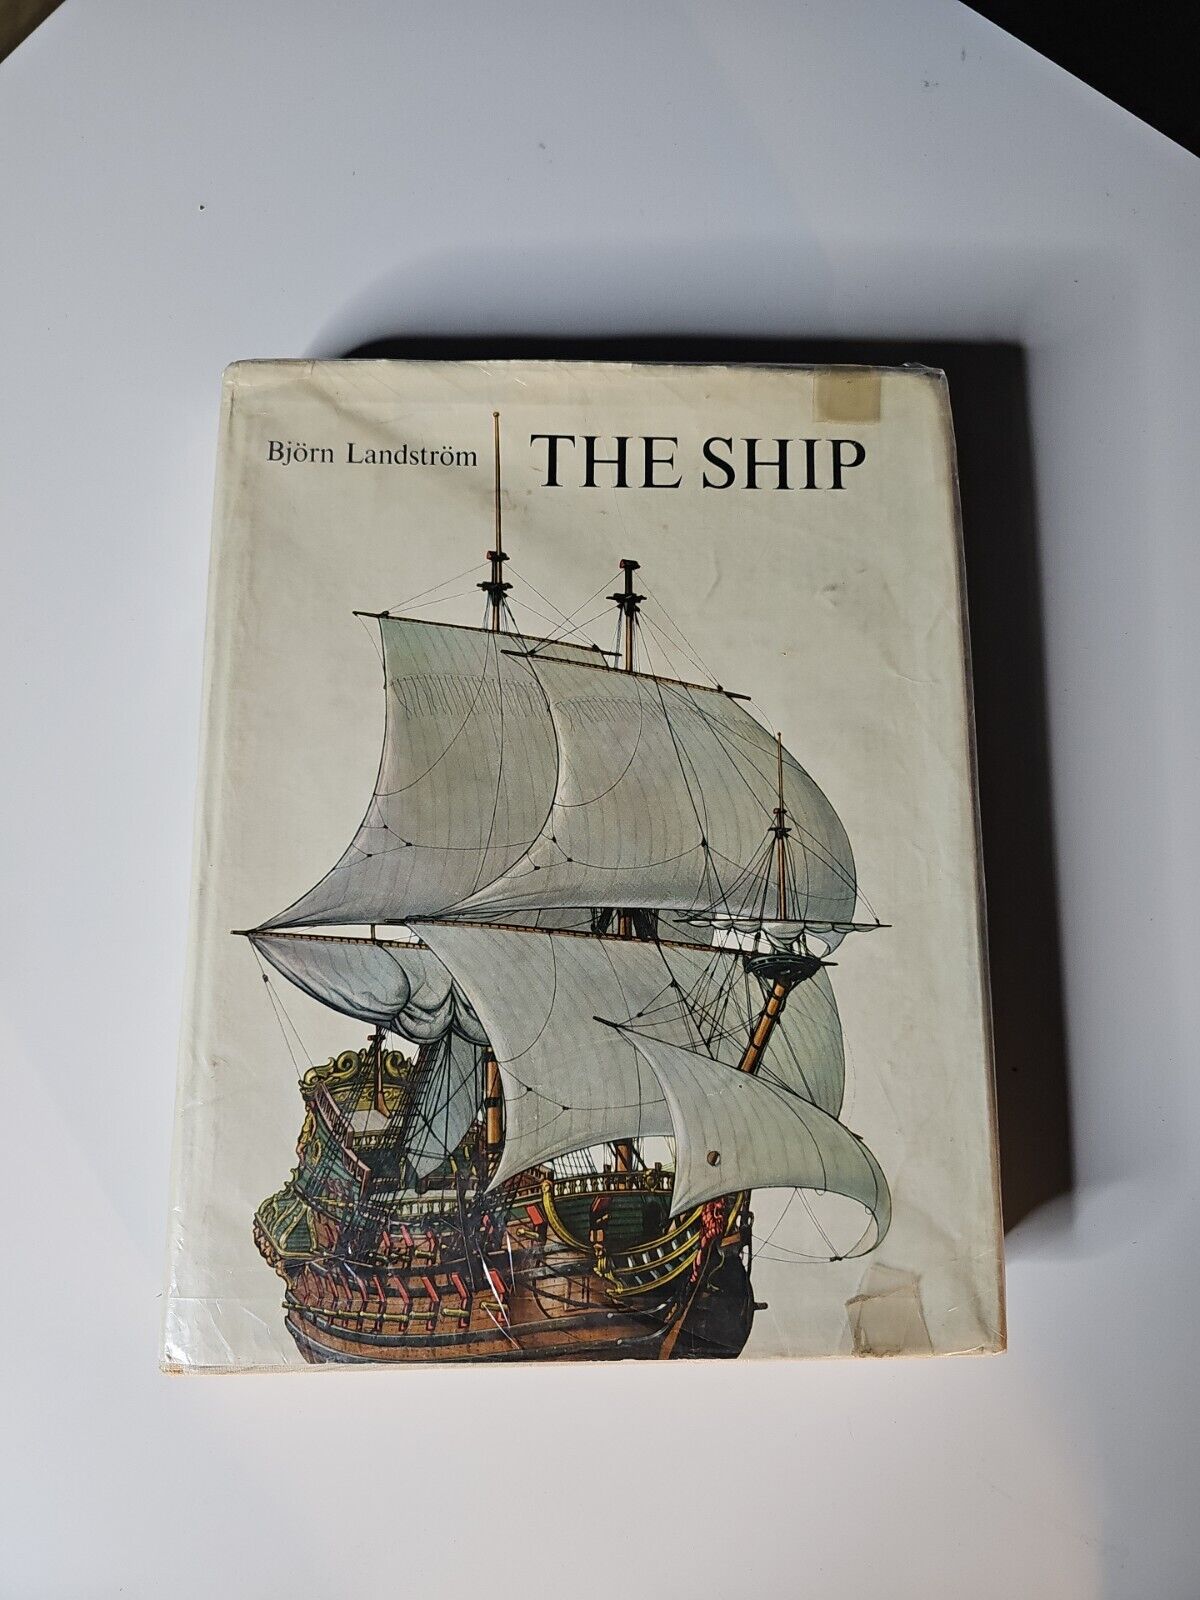 The Ship by Bjorn Landstrom (Hardcover, 1961)